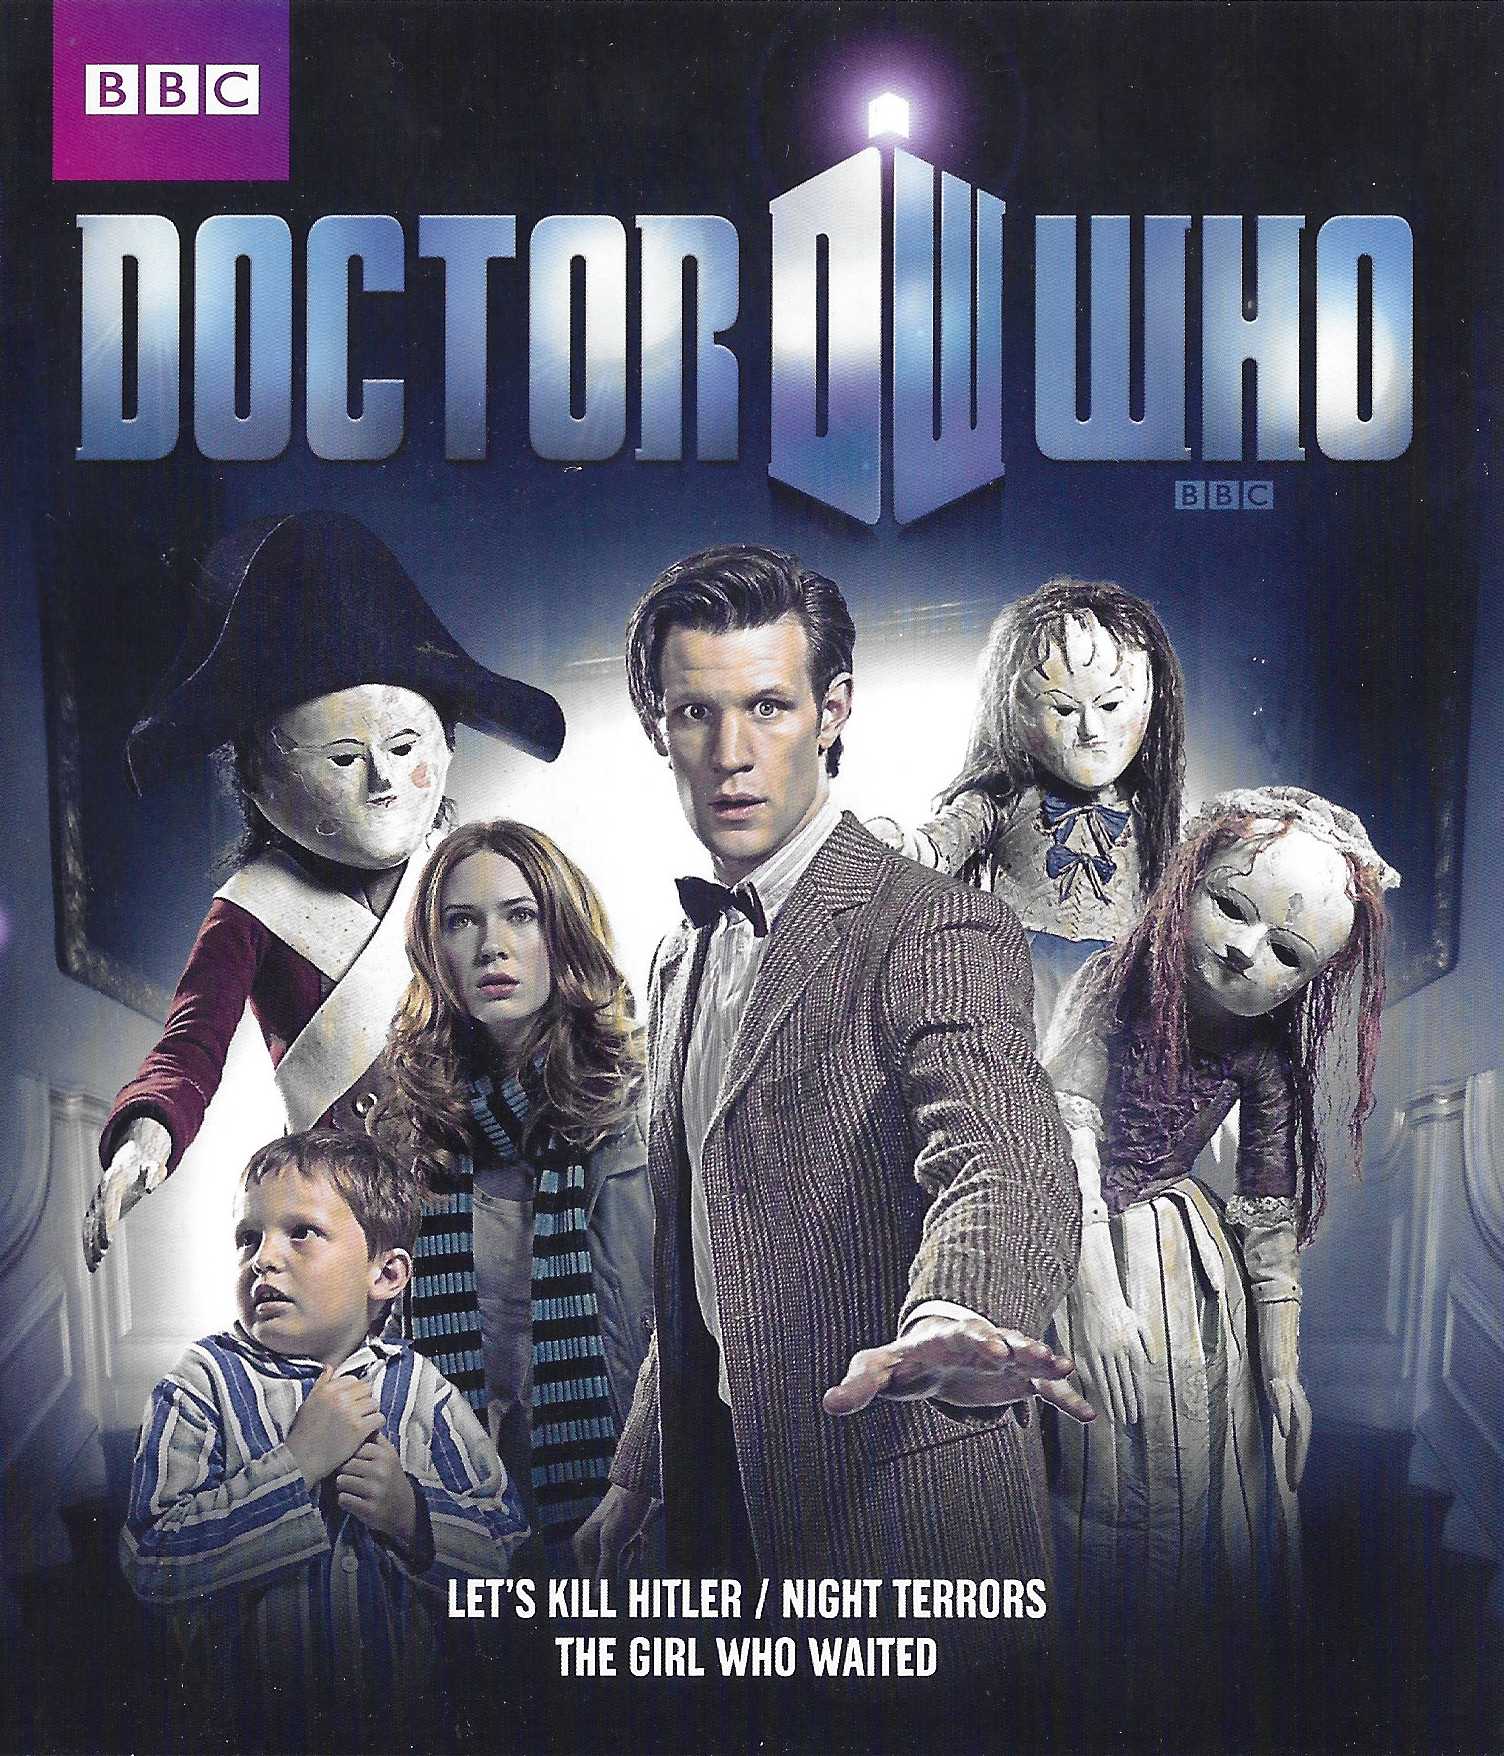 Picture of Doctor Who - Series 6, part 2a by artist Steven Moffat / Mark Gatiss / Tom Macrae from the BBC blu-rays - Records and Tapes library